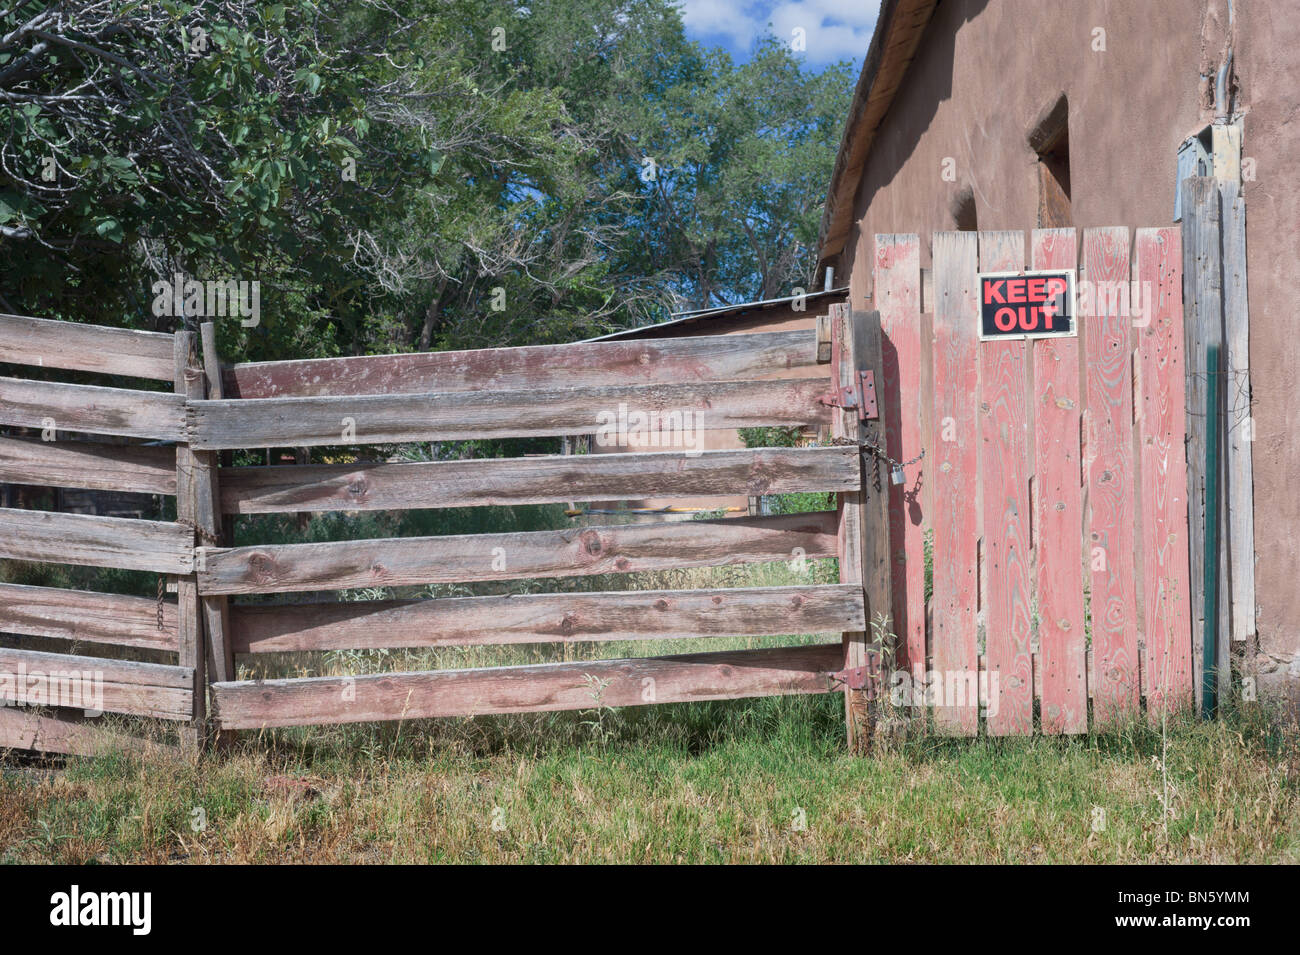 An old weathered wood fence and locked gate, with a 'KEEP OUT' sign posted, found on the side streets of Tularosa, New Mexico. Stock Photo